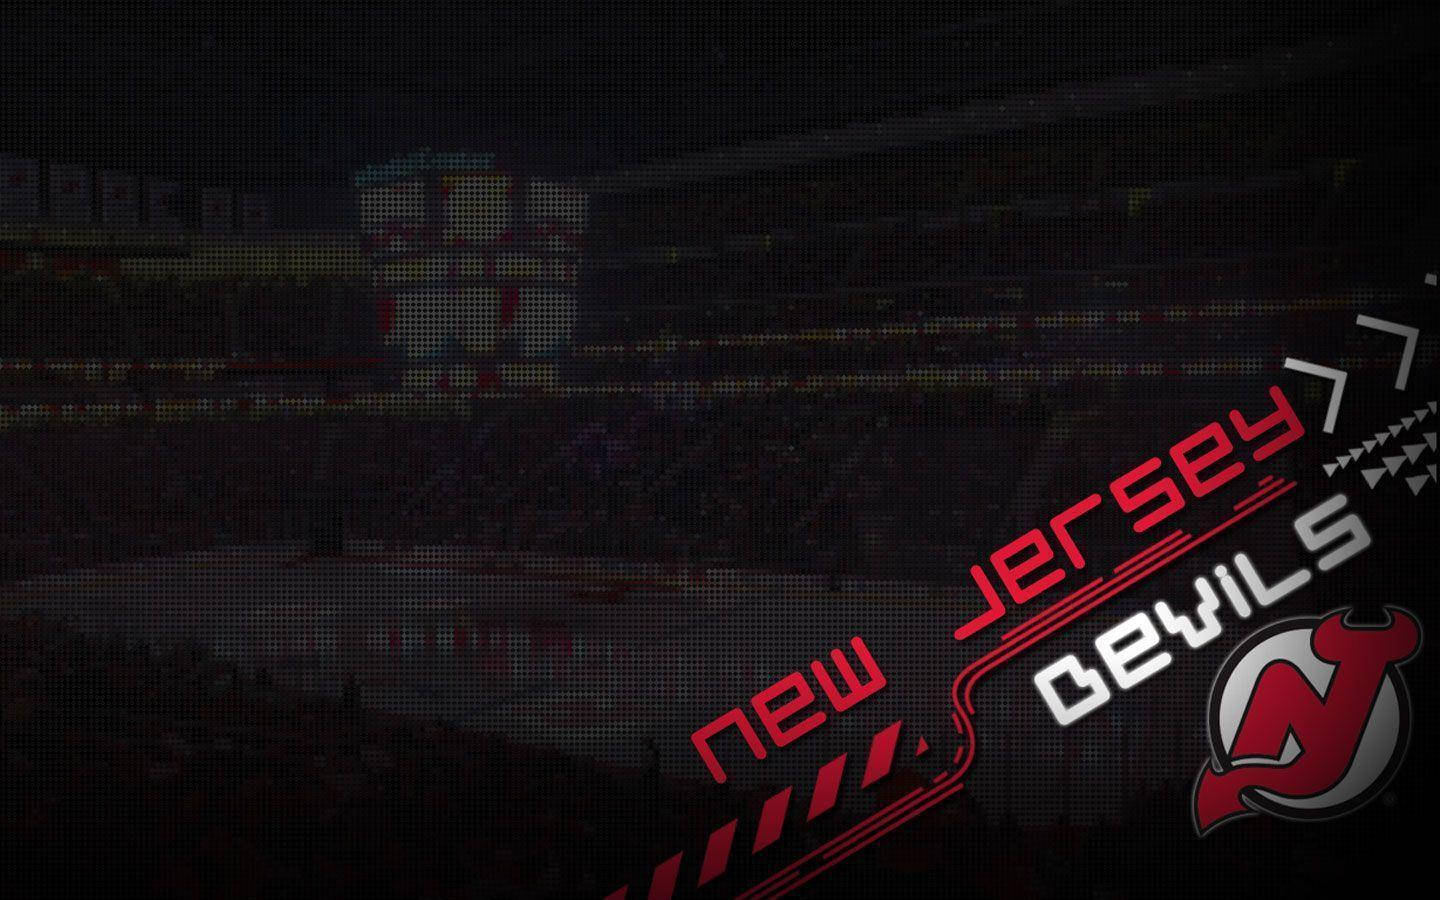 An electrifying night at the New Jersey Devils Stadium Wallpaper